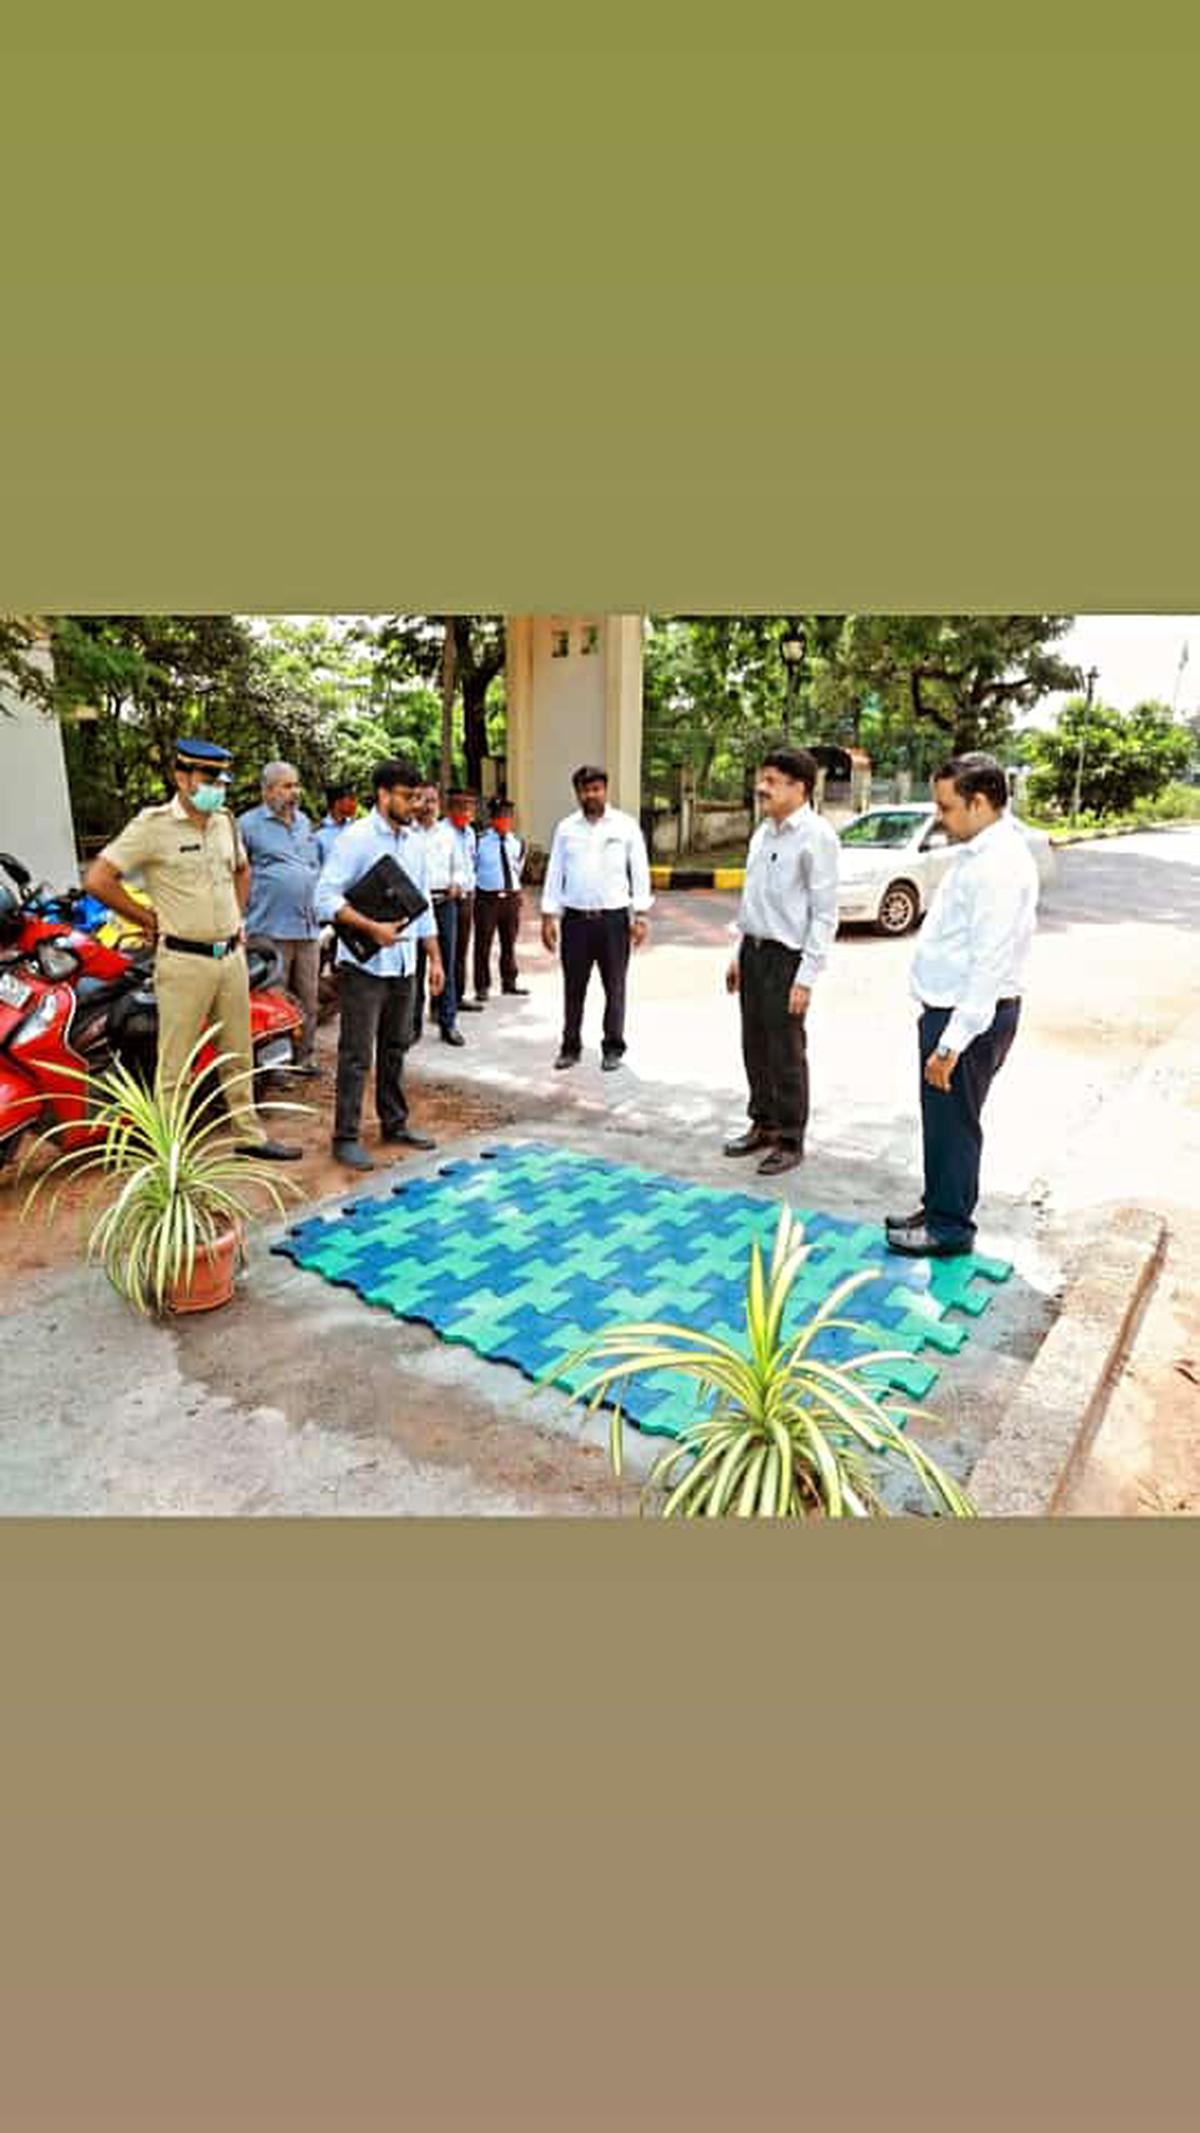 Kochi-based start-up makes interlocking tiles and furniture from plastic waste